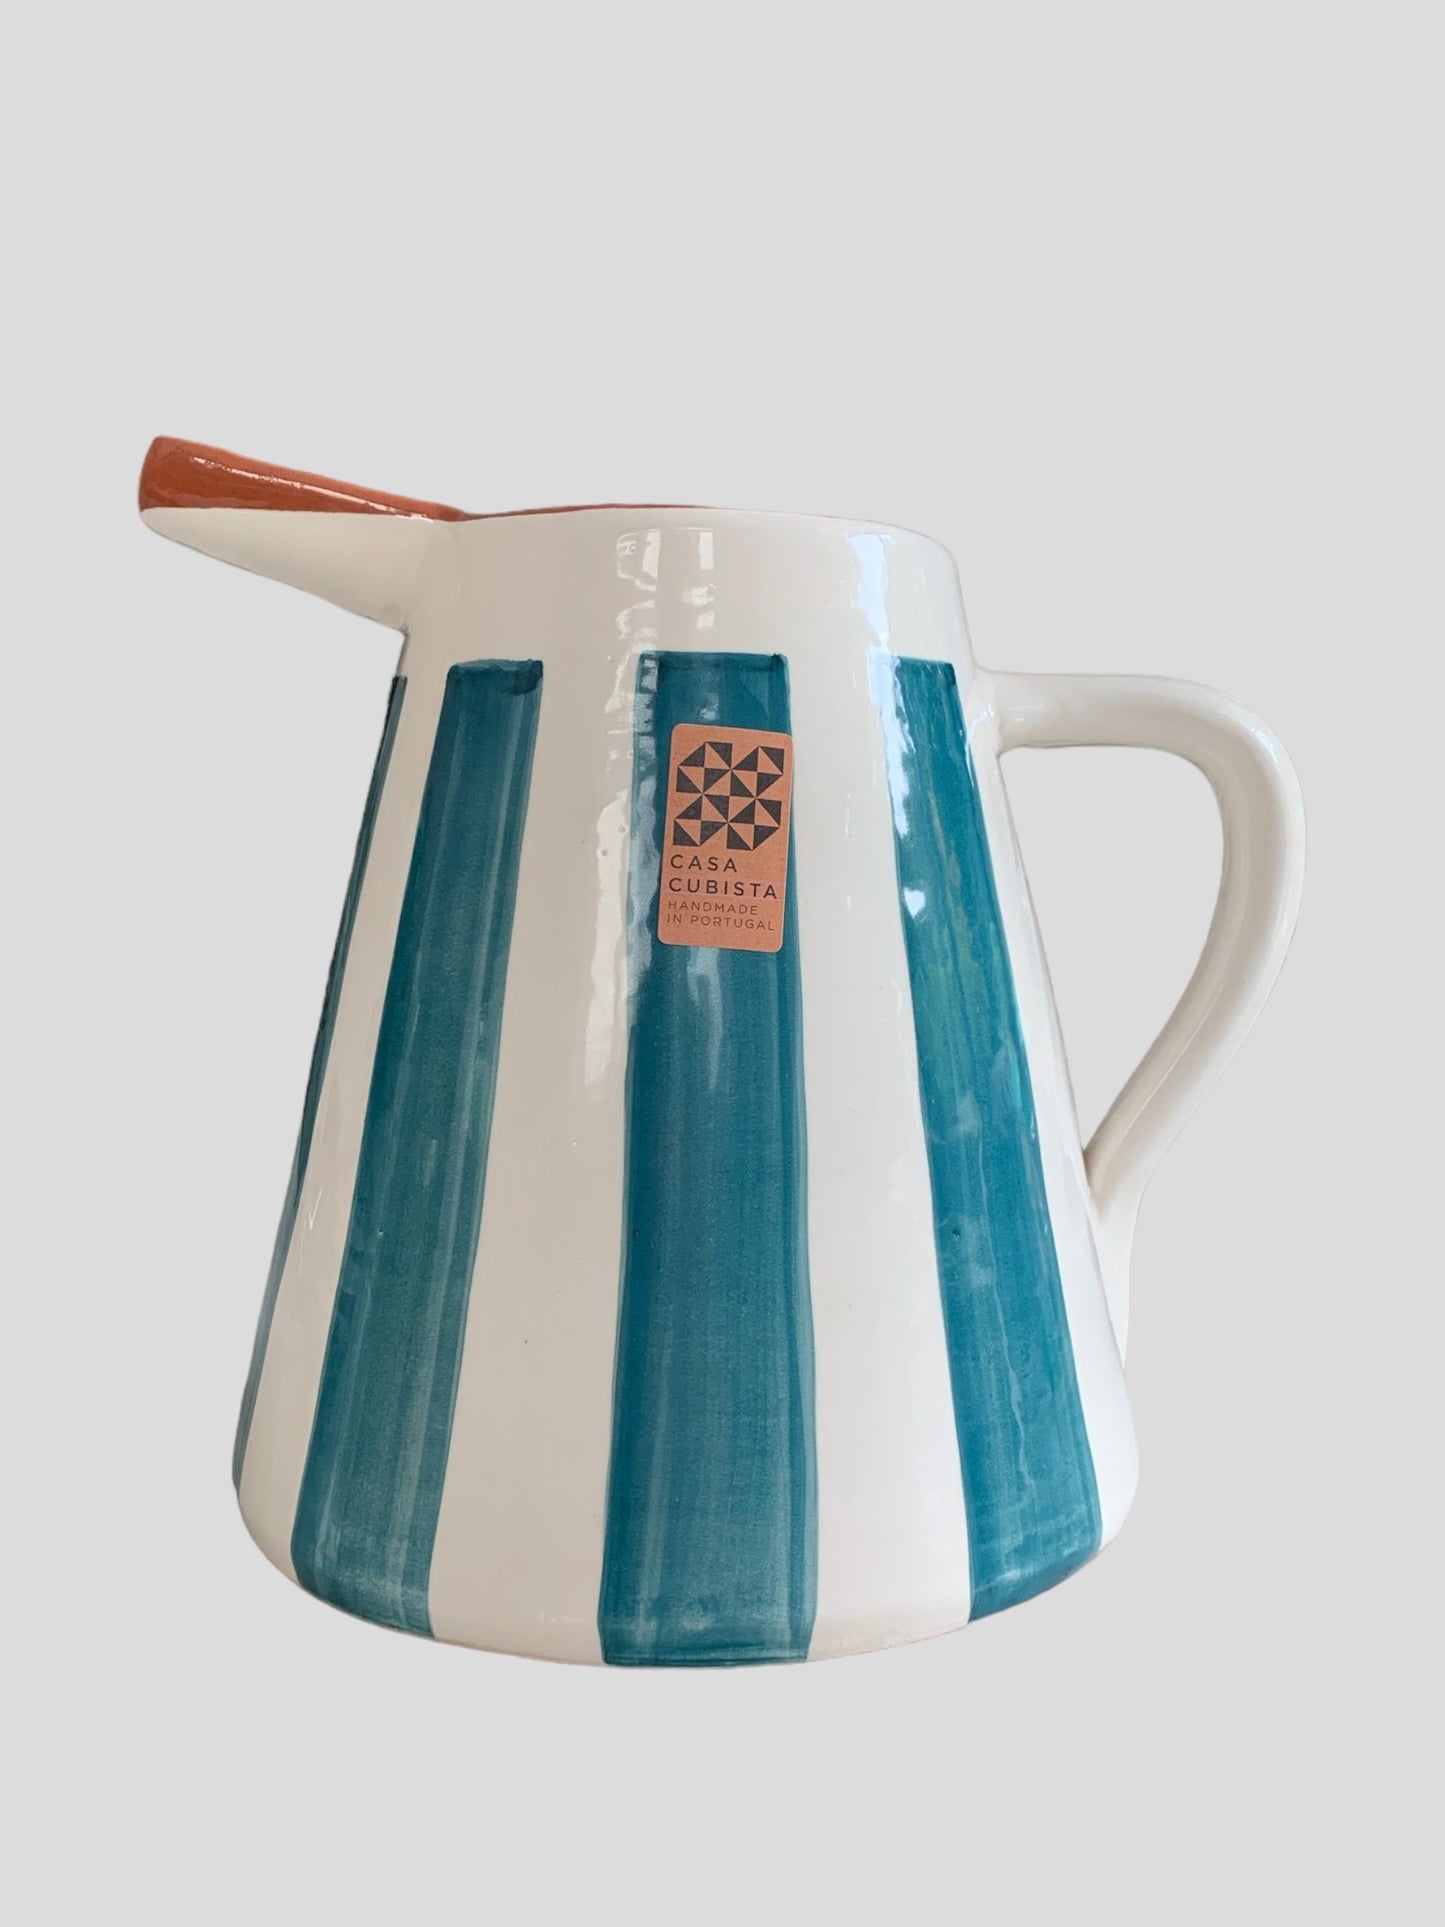 A large ceramic jug hand-painted with bold stripes in teal.  Made in Portugal by casa cubista